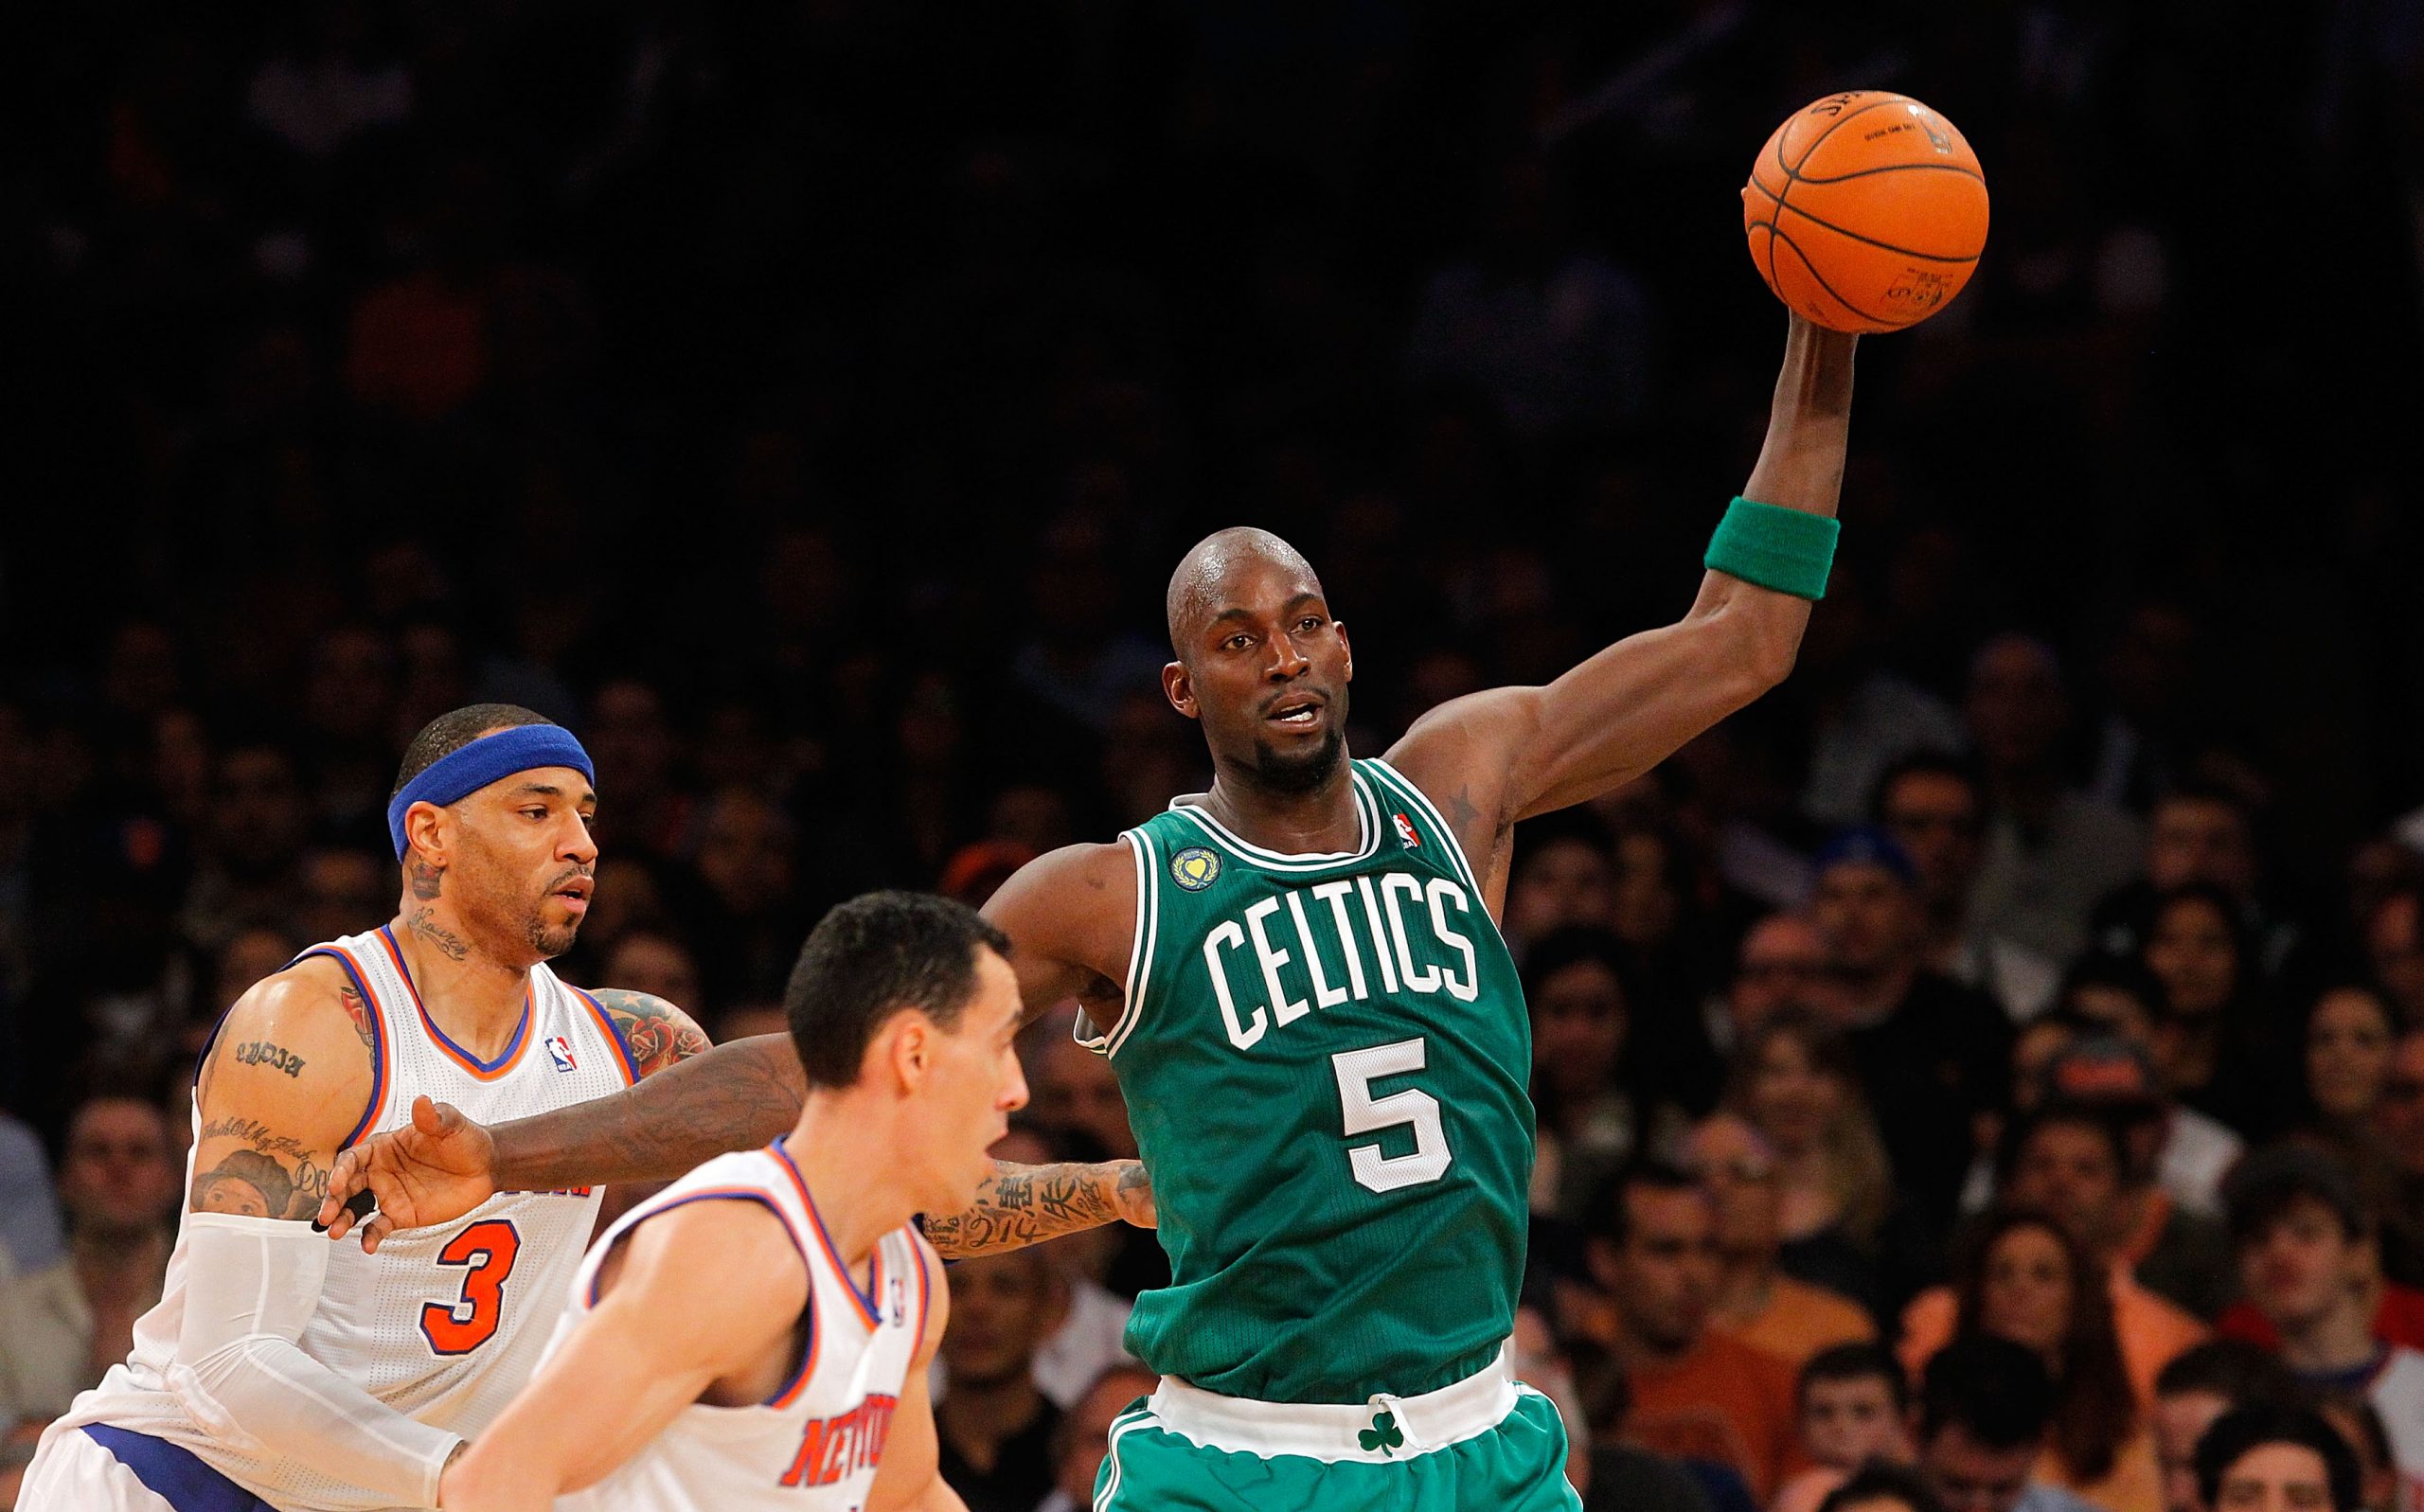 Kevin Garnett of the Boston Celtics in action against the New York Knicks during Game 5 of the Eastern Conference Quarterfinals on May 1, 2013, at Madison Square Garden in New York City.